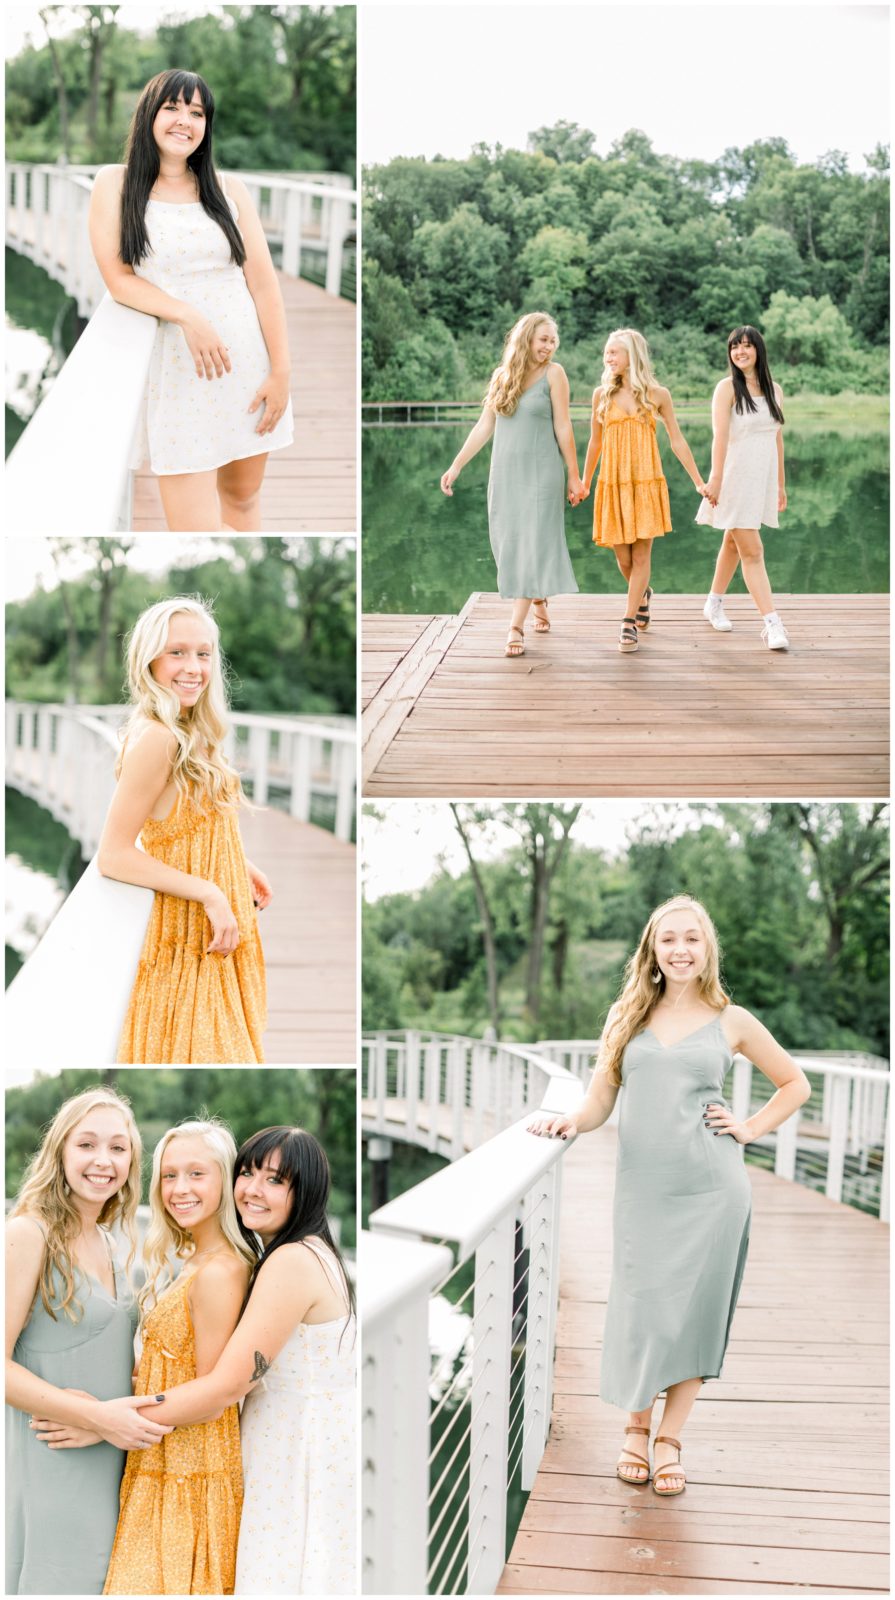 Summer Golden Hour Session in a park in Chaska with 3 sisters